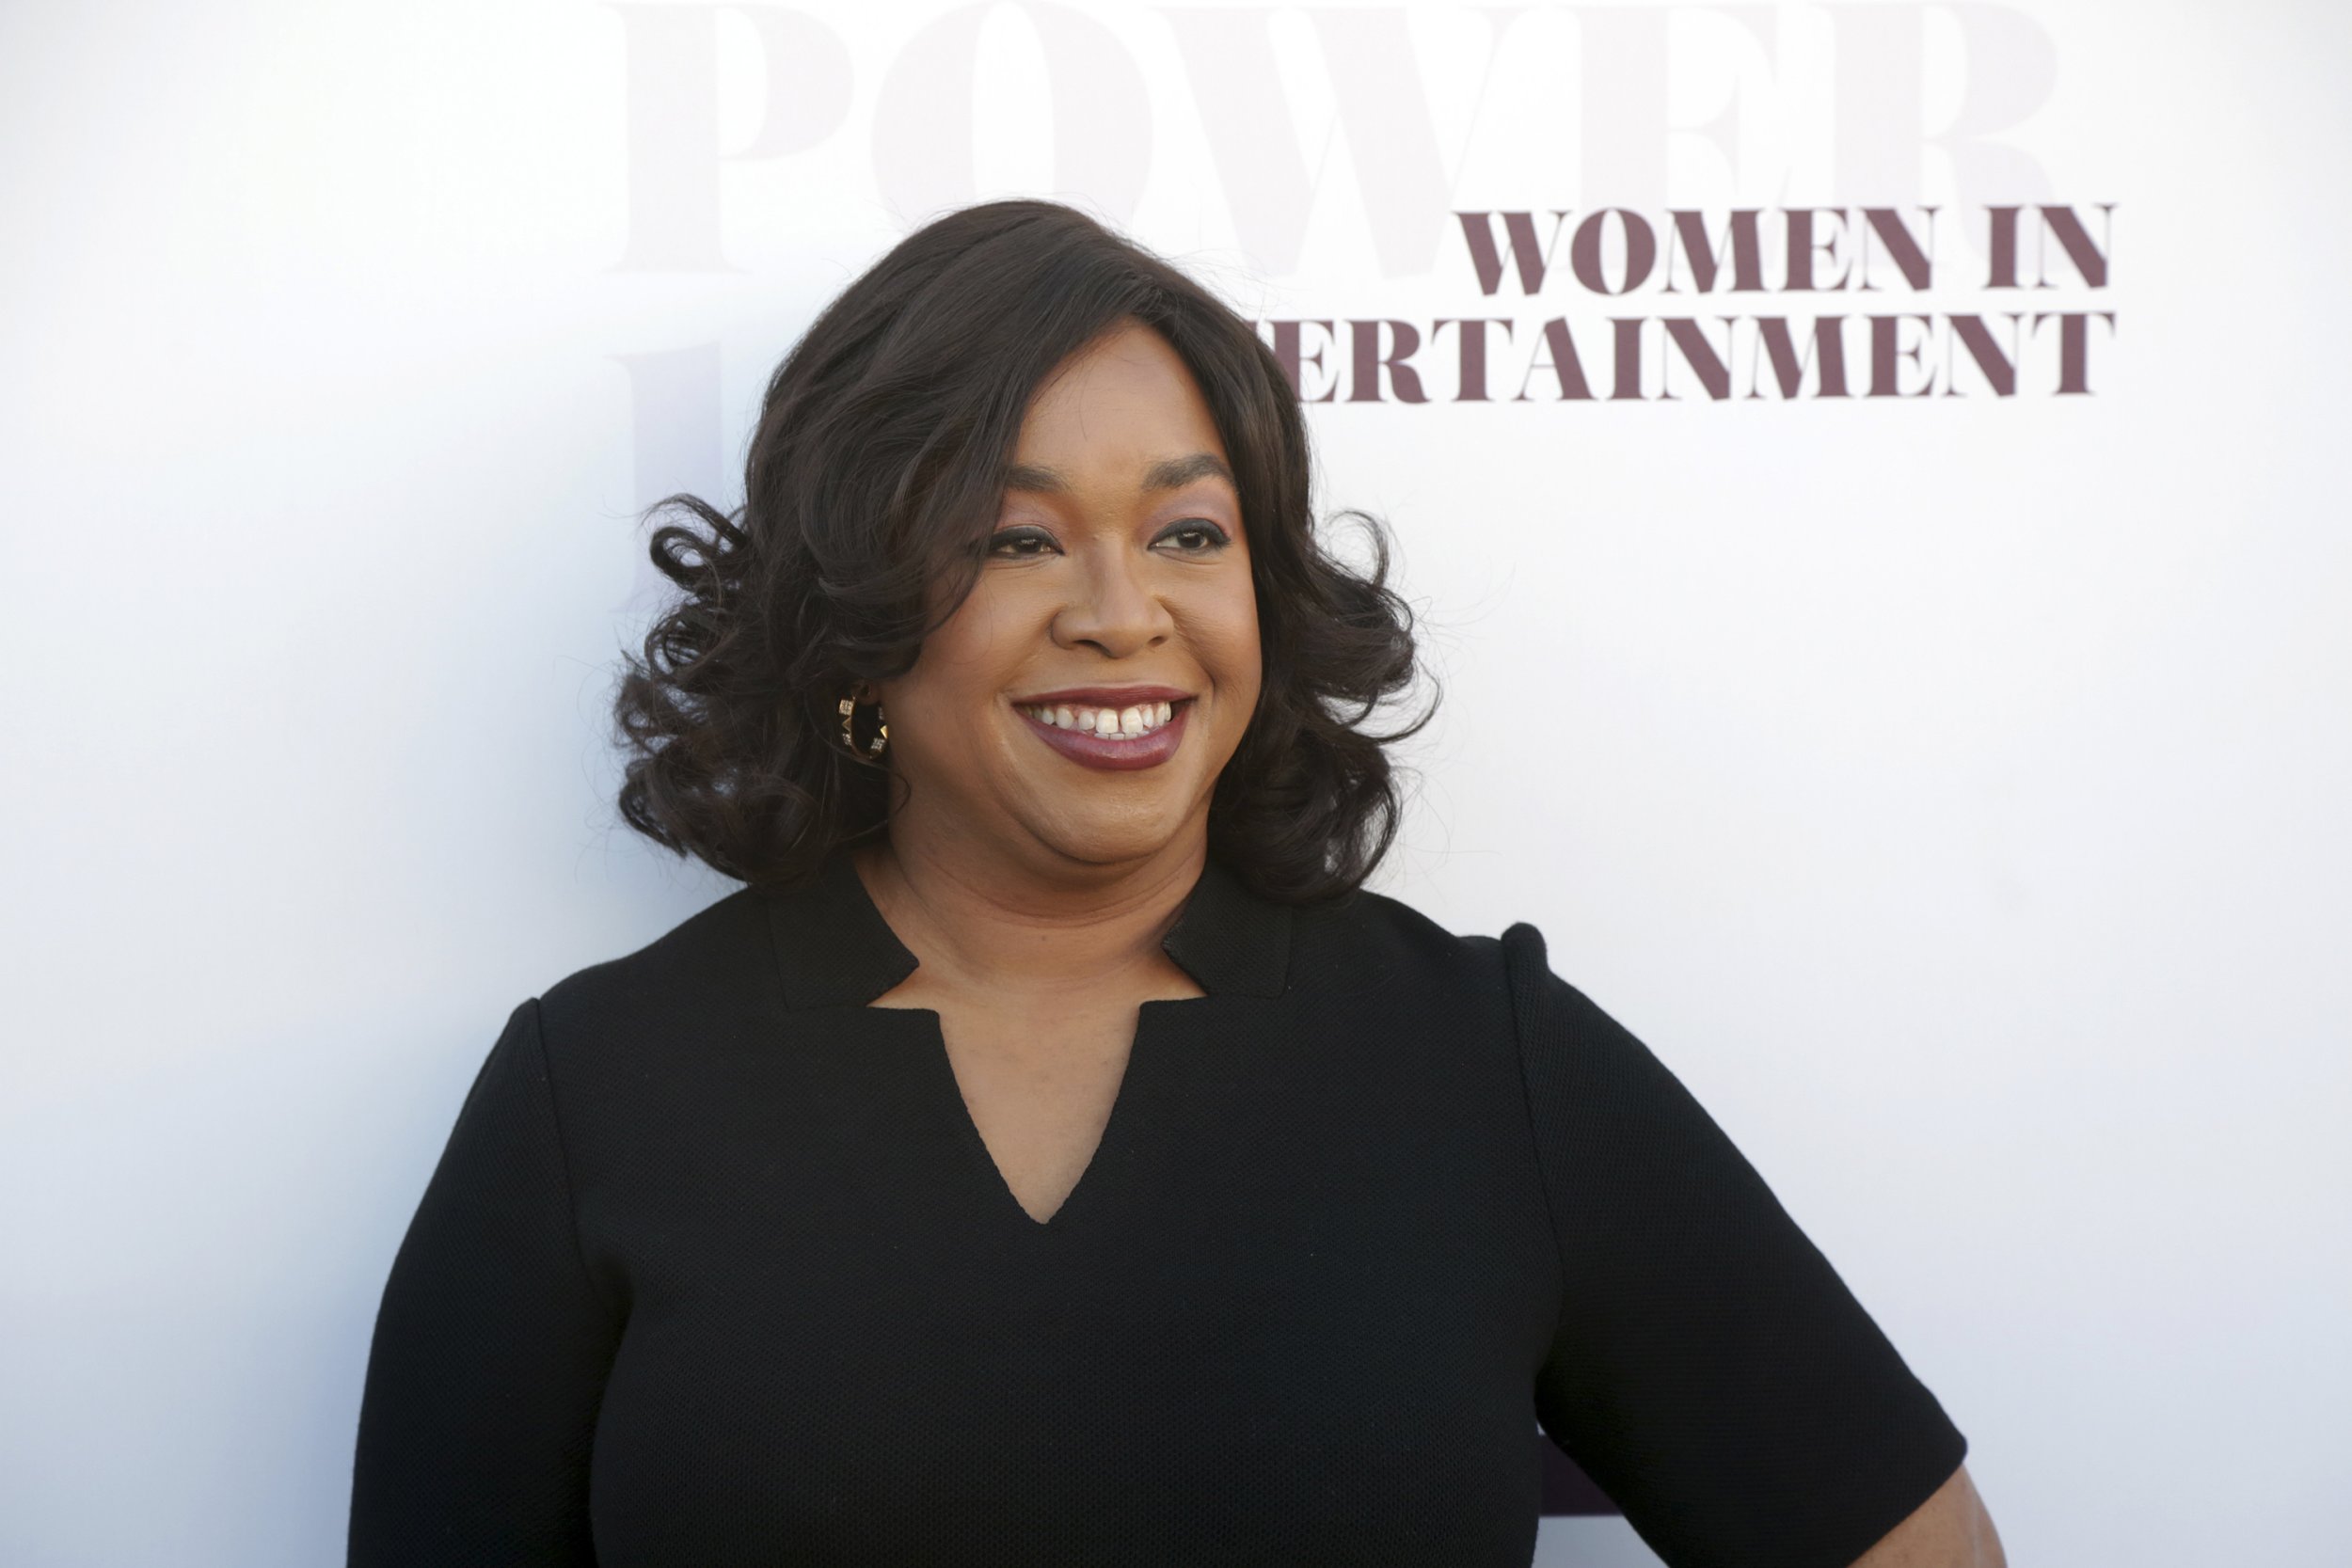 New Shonda Rhimes Drama Ordered By ABC; Details About 'The Catch' Pilot